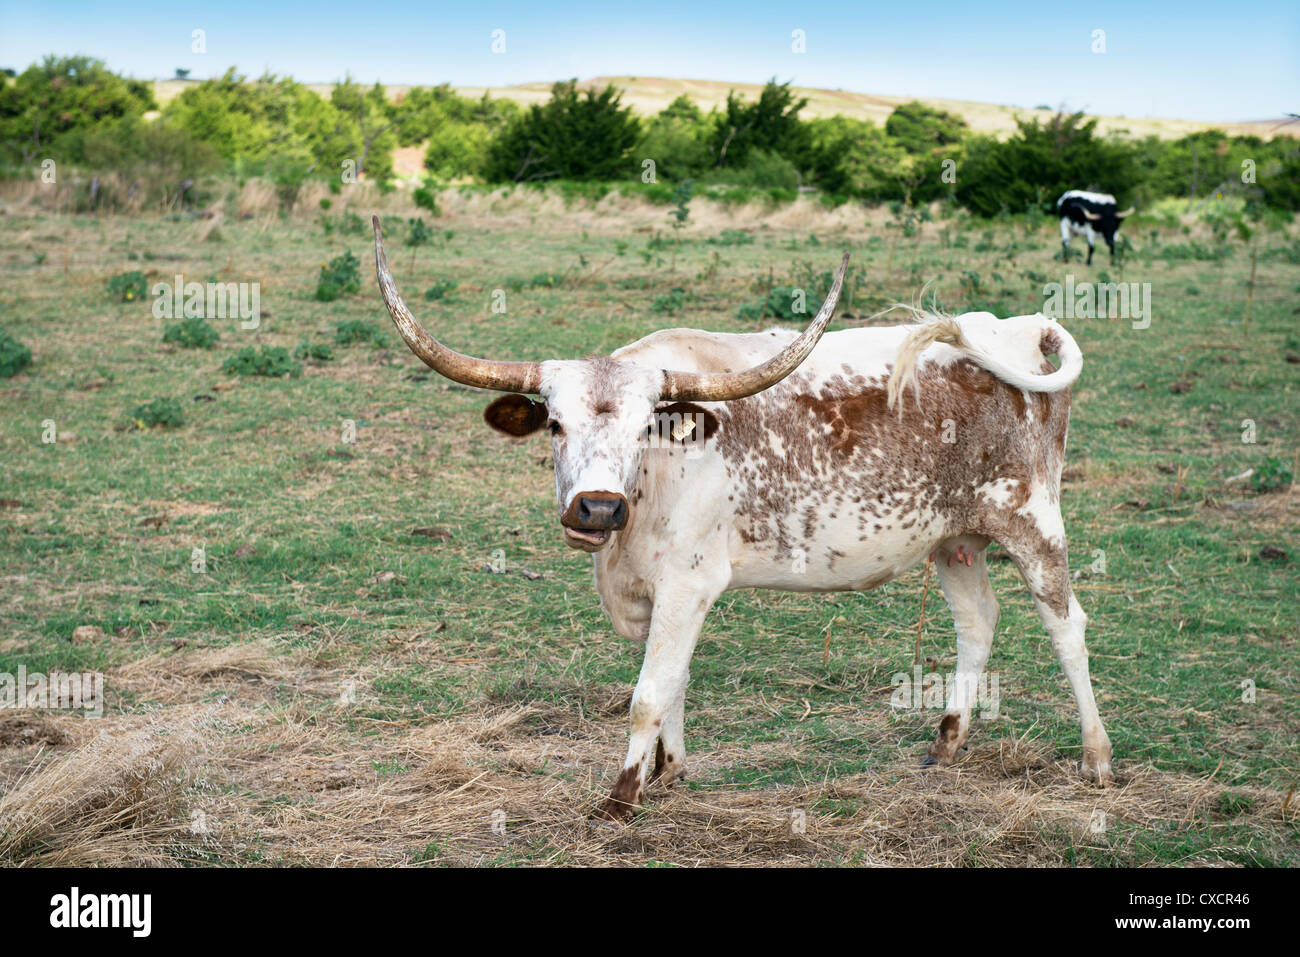 A  brown and white Texas Longhorn cow, Bos bos, stands in a pasture in western Oklahoma, USA. Stock Photo